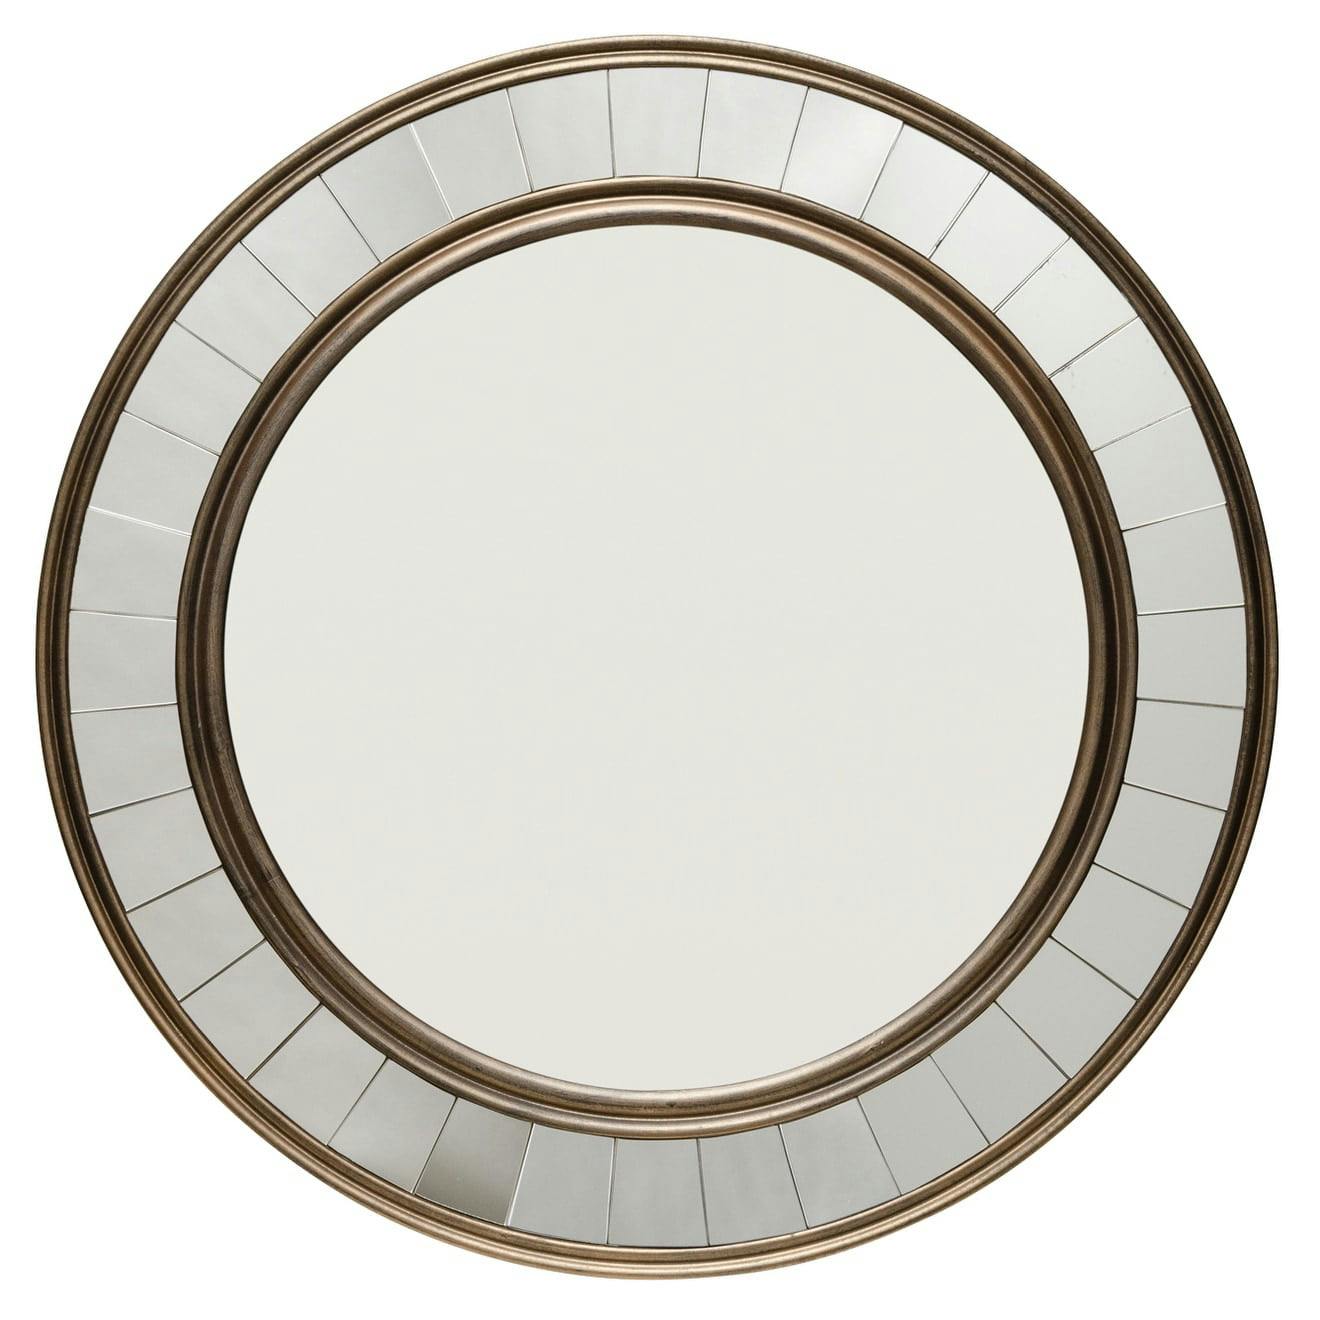 Eloise Round Antique Bronze and Gold Wood Wall Mirror - 30.5"